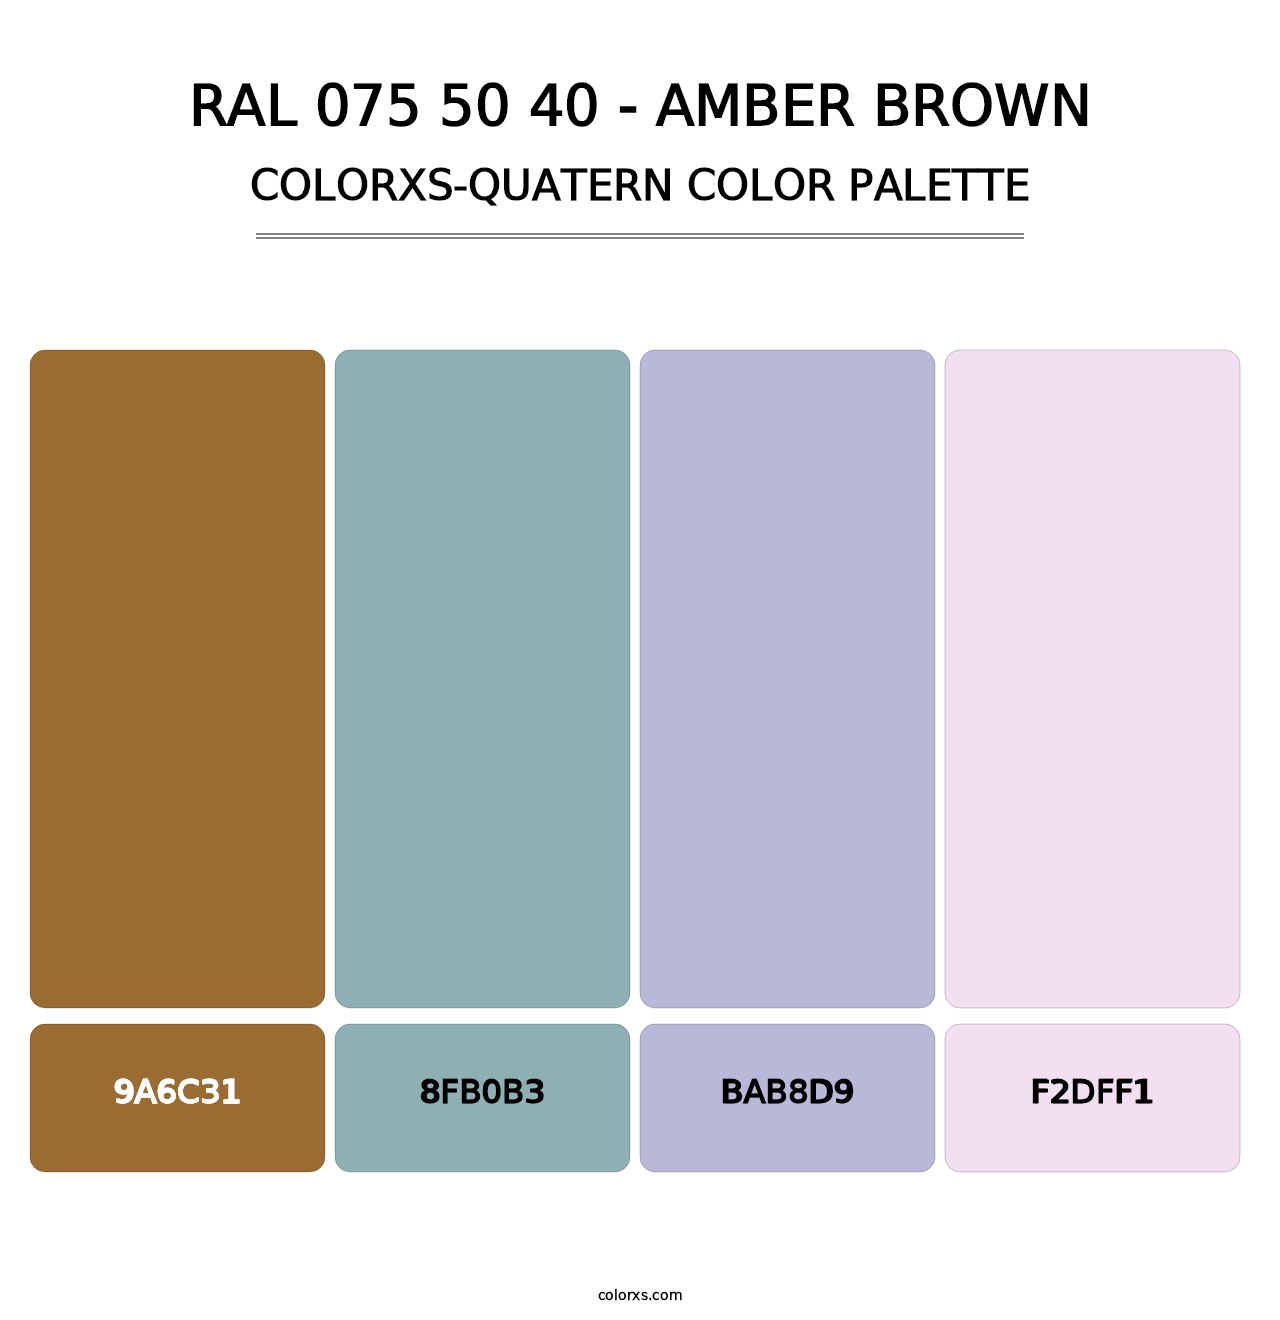 RAL 075 50 40 - Amber Brown - Colorxs Quatern Palette